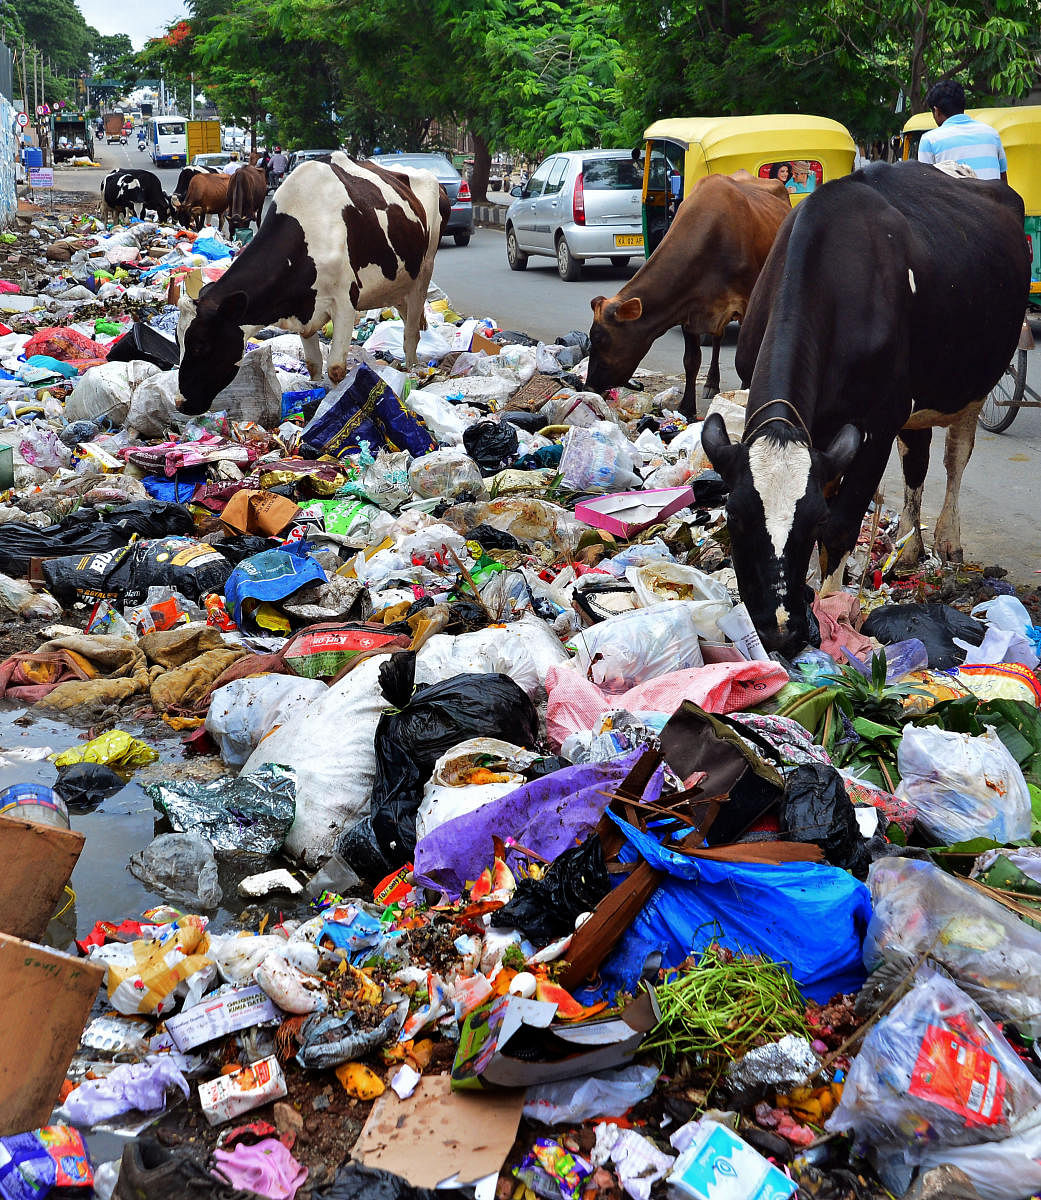 A two-star illusion about clean Bengaluru